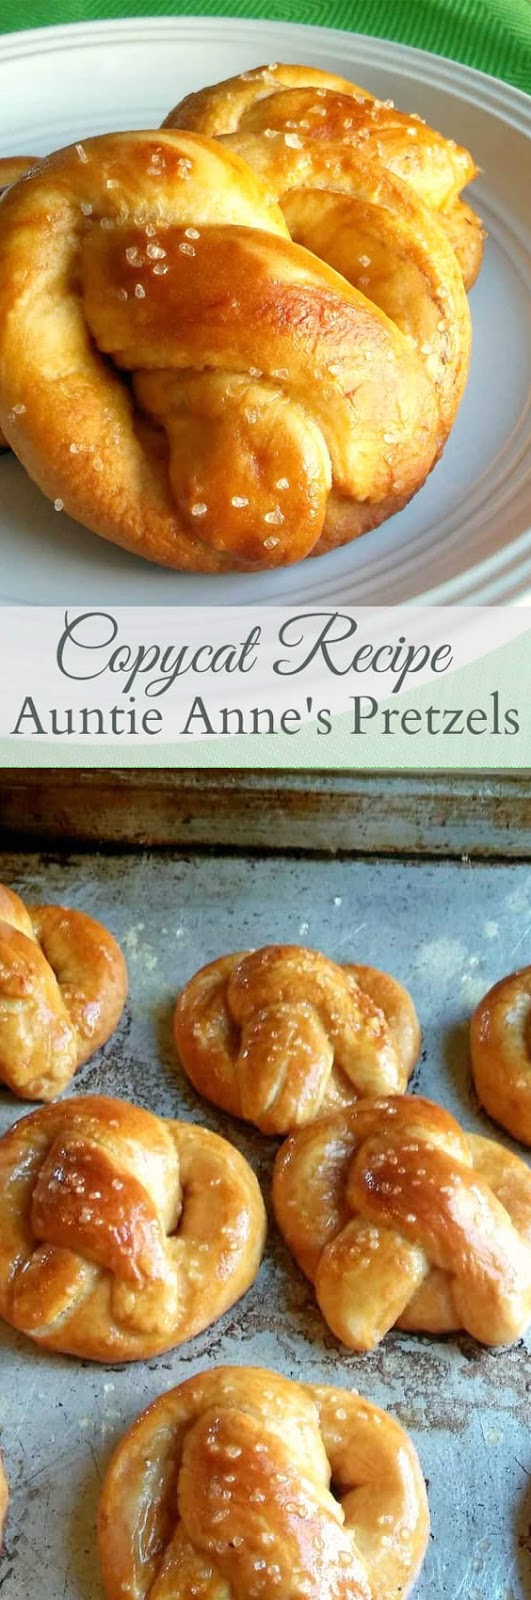 Copycat Recipe Auntie Anne's Pretzels with Cheddar Dipping Sauce